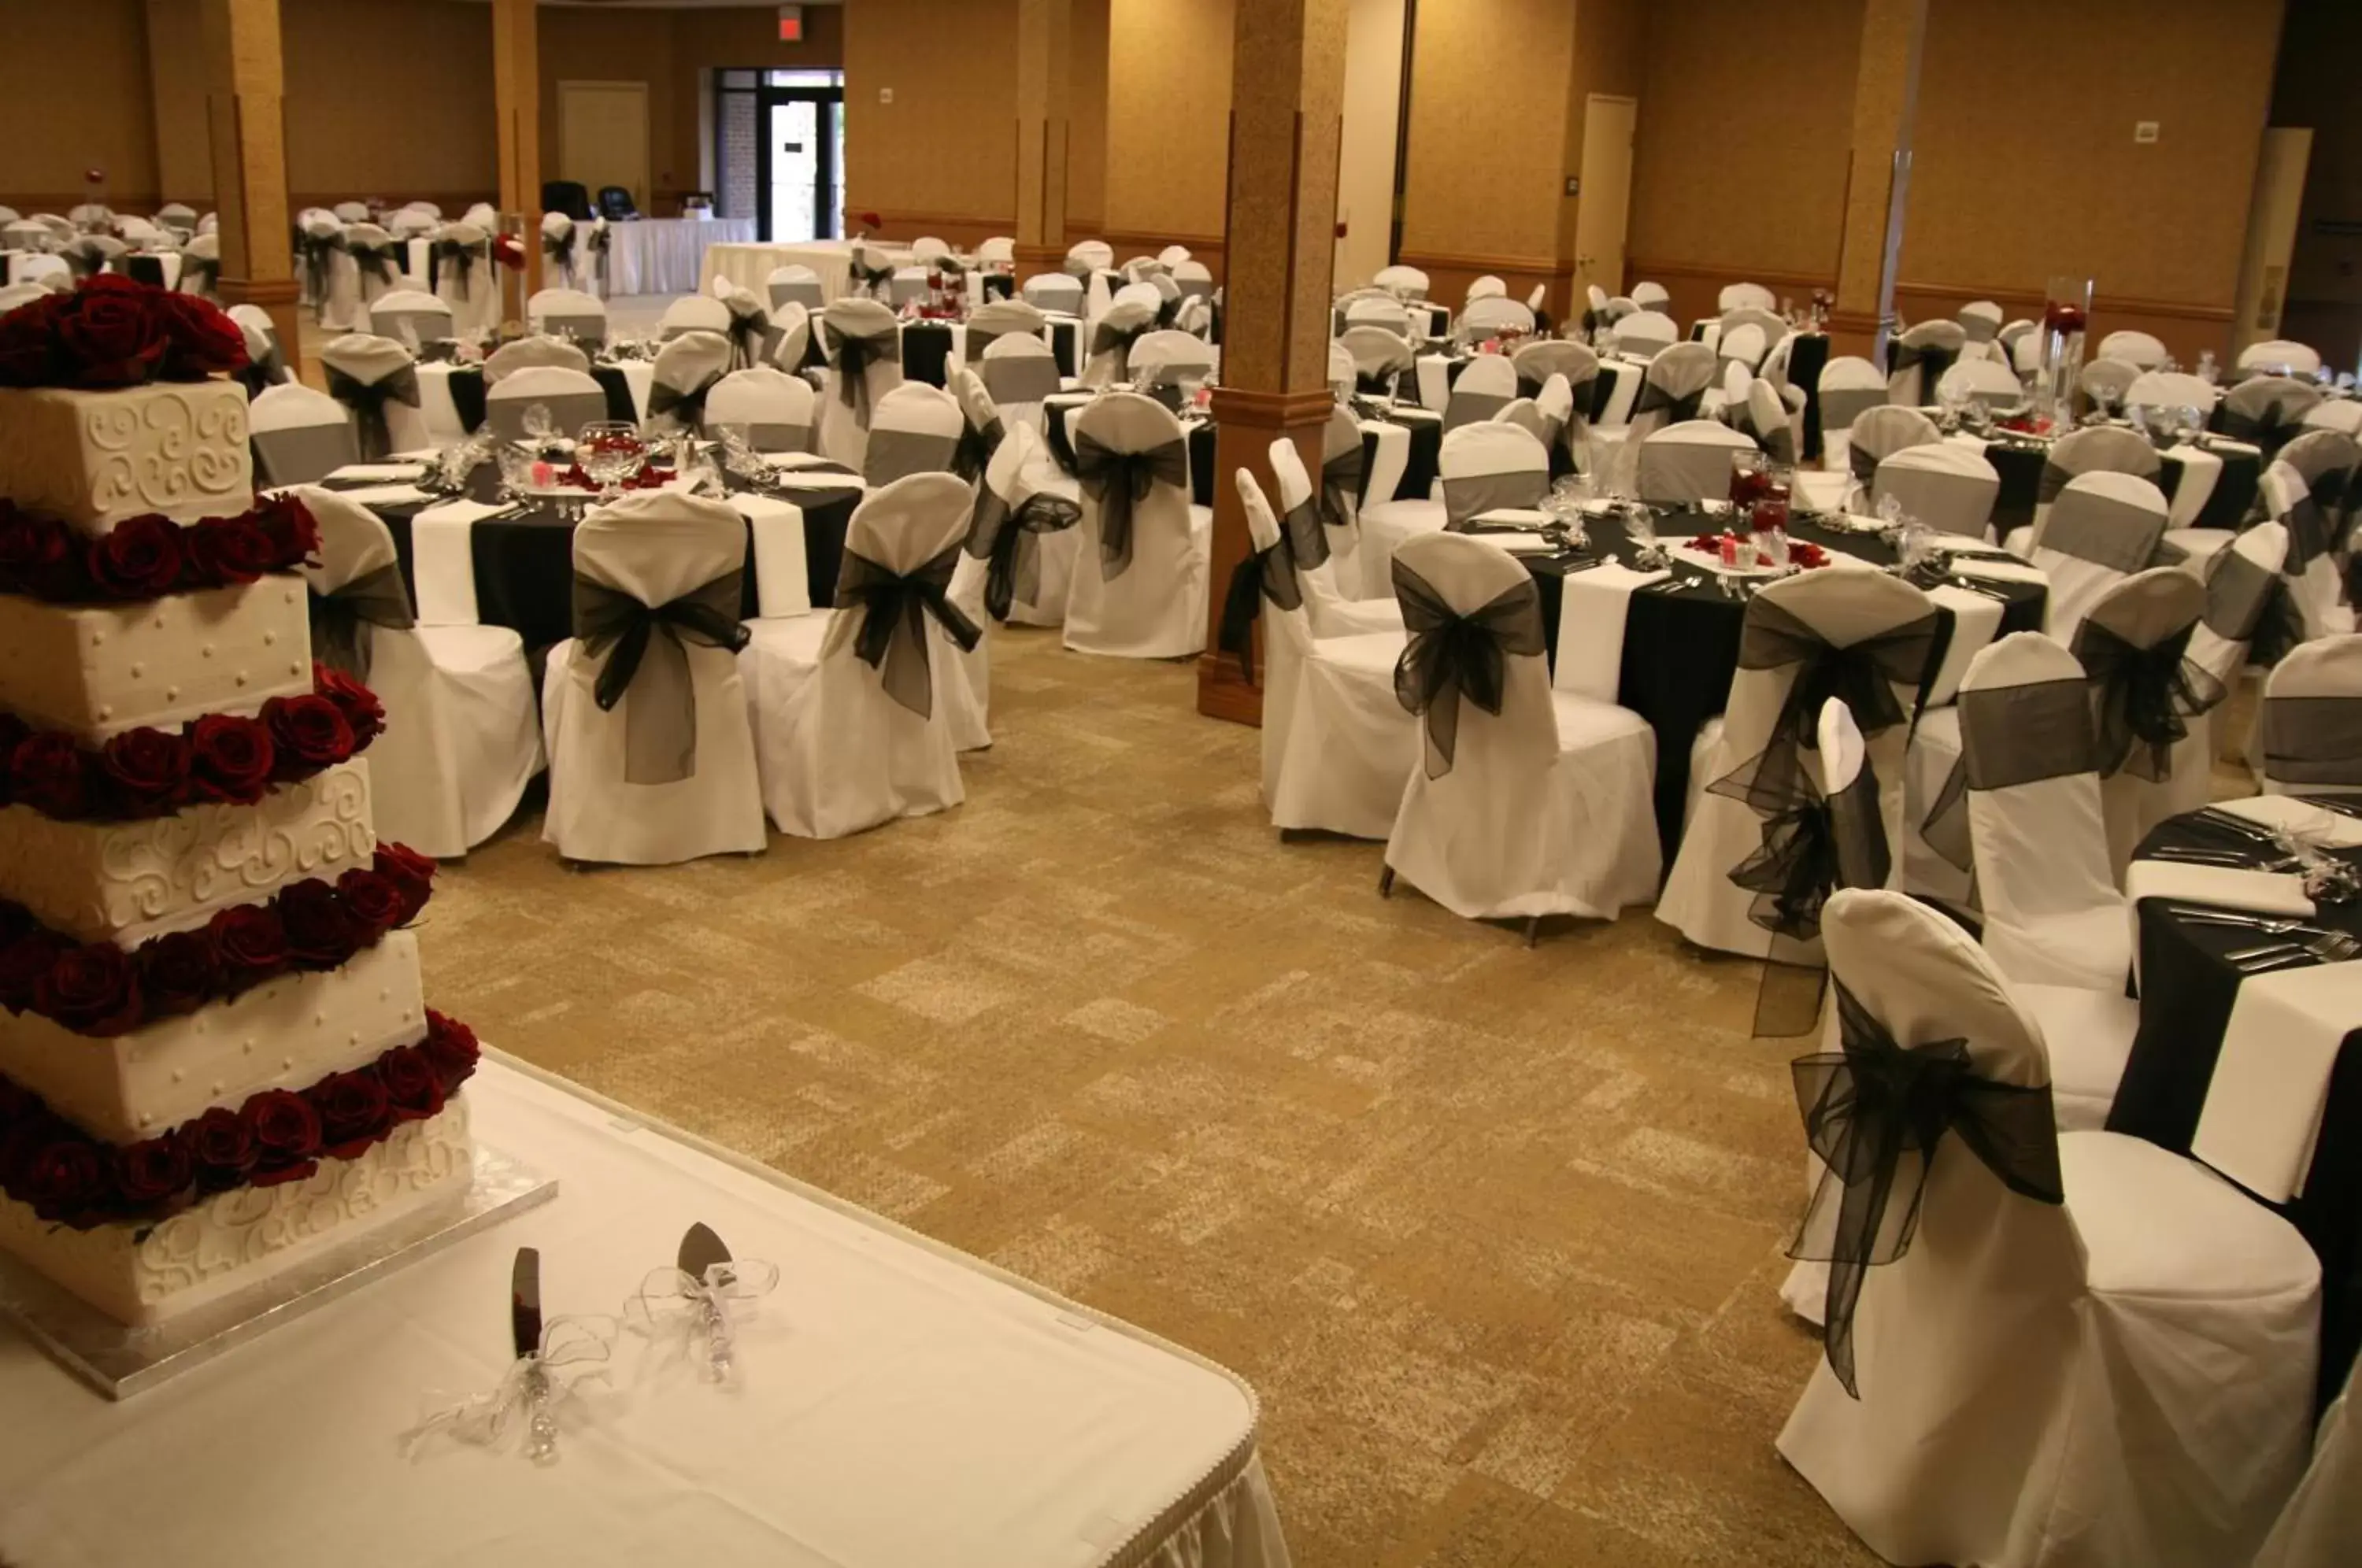 Banquet/Function facilities, Banquet Facilities in Country Inn & Suites by Radisson, Lincoln North Hotel and Conference Center, NE